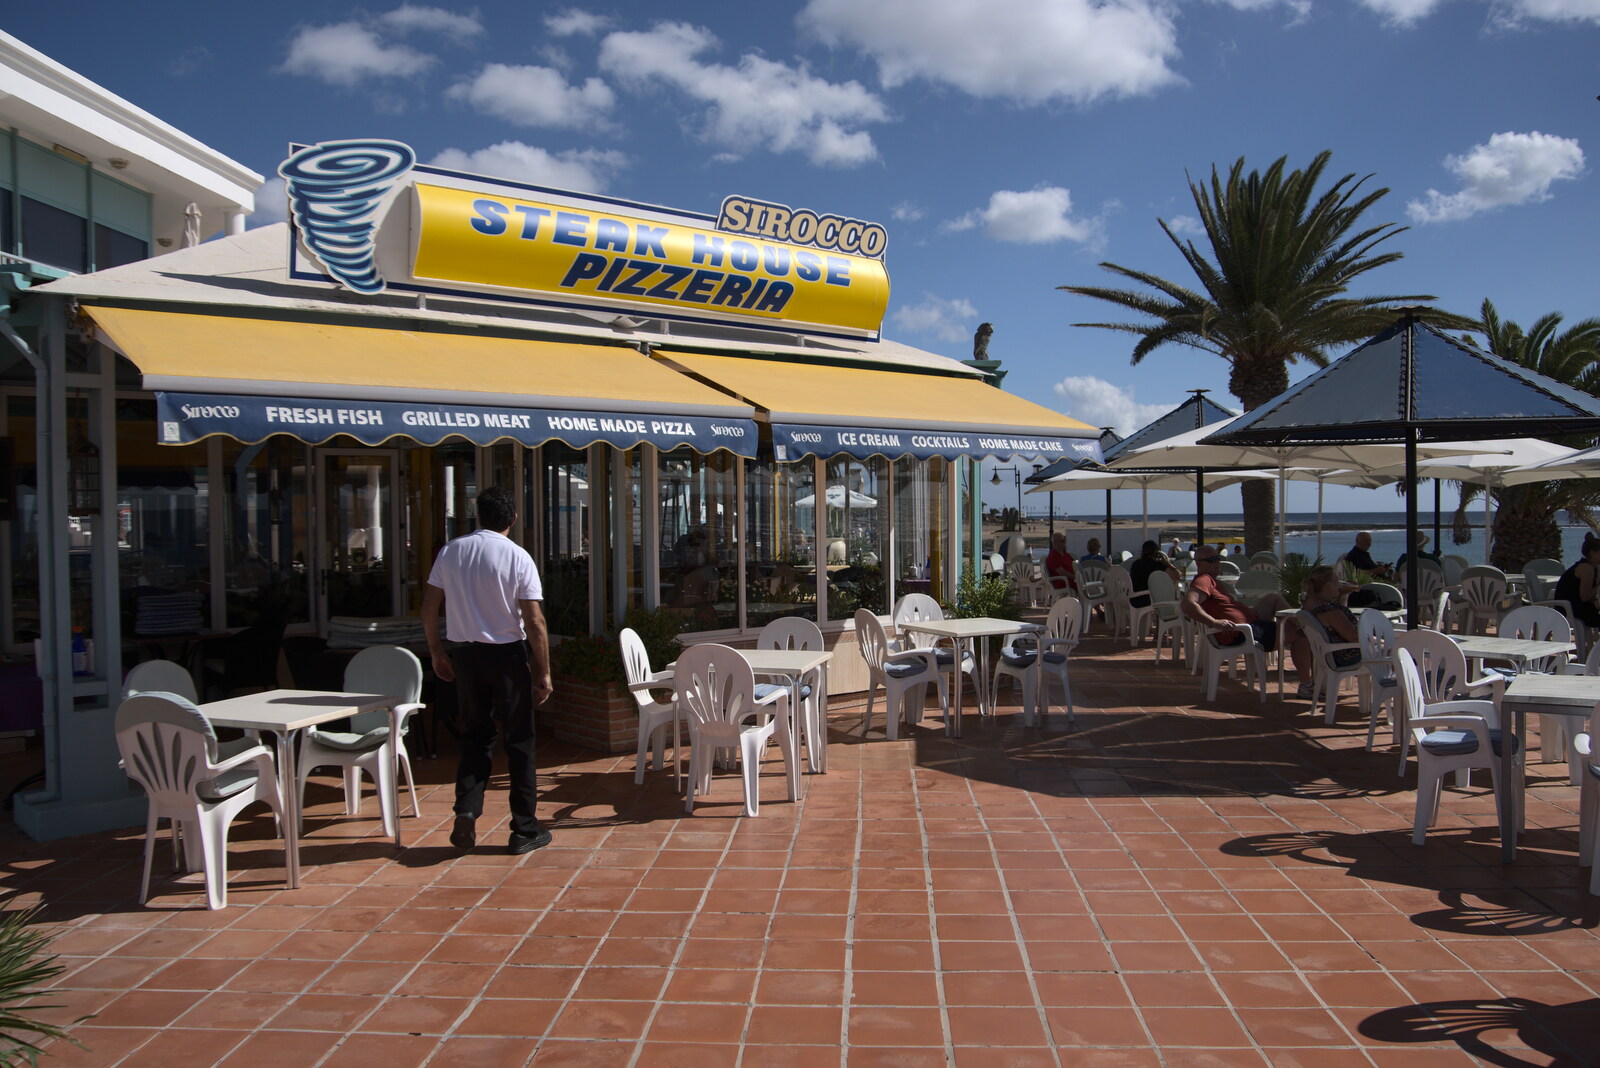 The Sirocco Steak House Pizzeria from Five Days in Lanzarote, Canary Islands, Spain - 24th October 2021